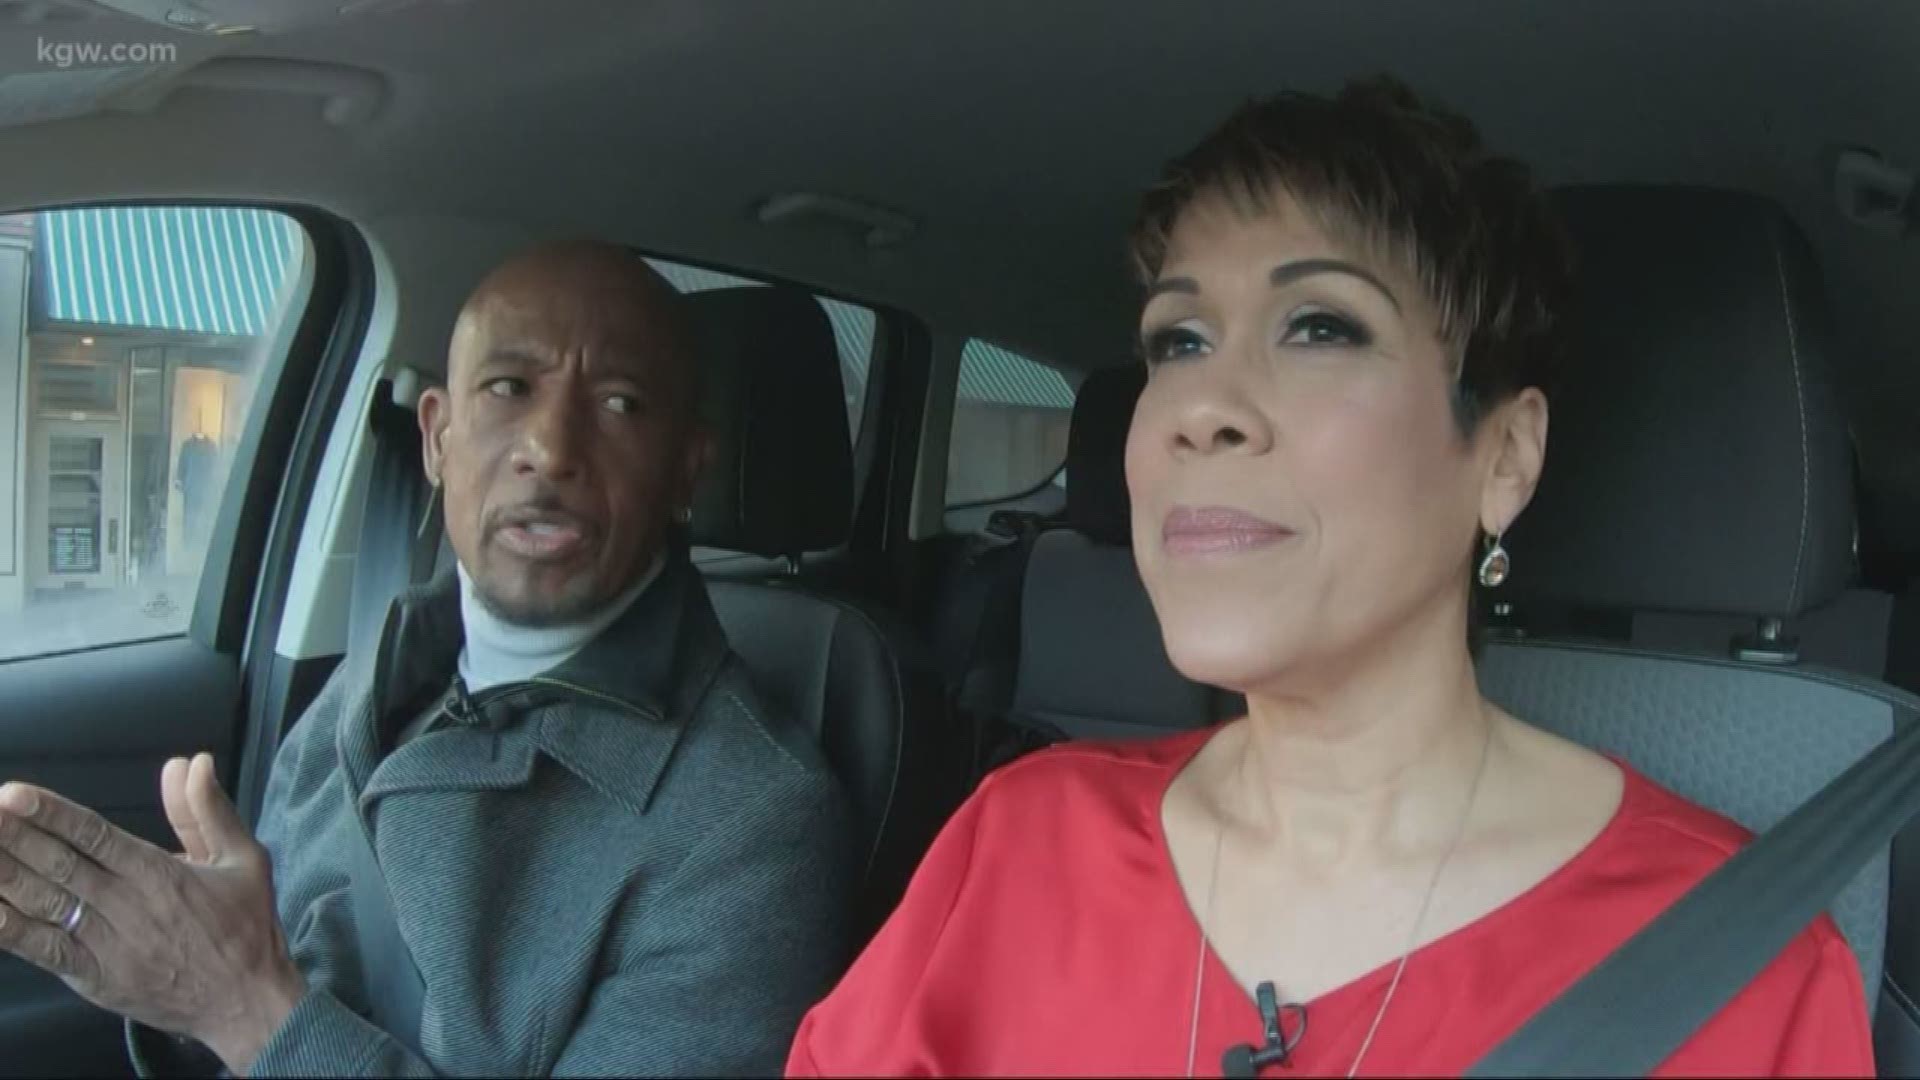 Join KGW's Brenda Braxton as she takes a ride around Portland with talk show host Montel Williams. He was in Portland because he's working on his own CBD line of products with the assistance of local company Cura, but the pair discussed so much more!